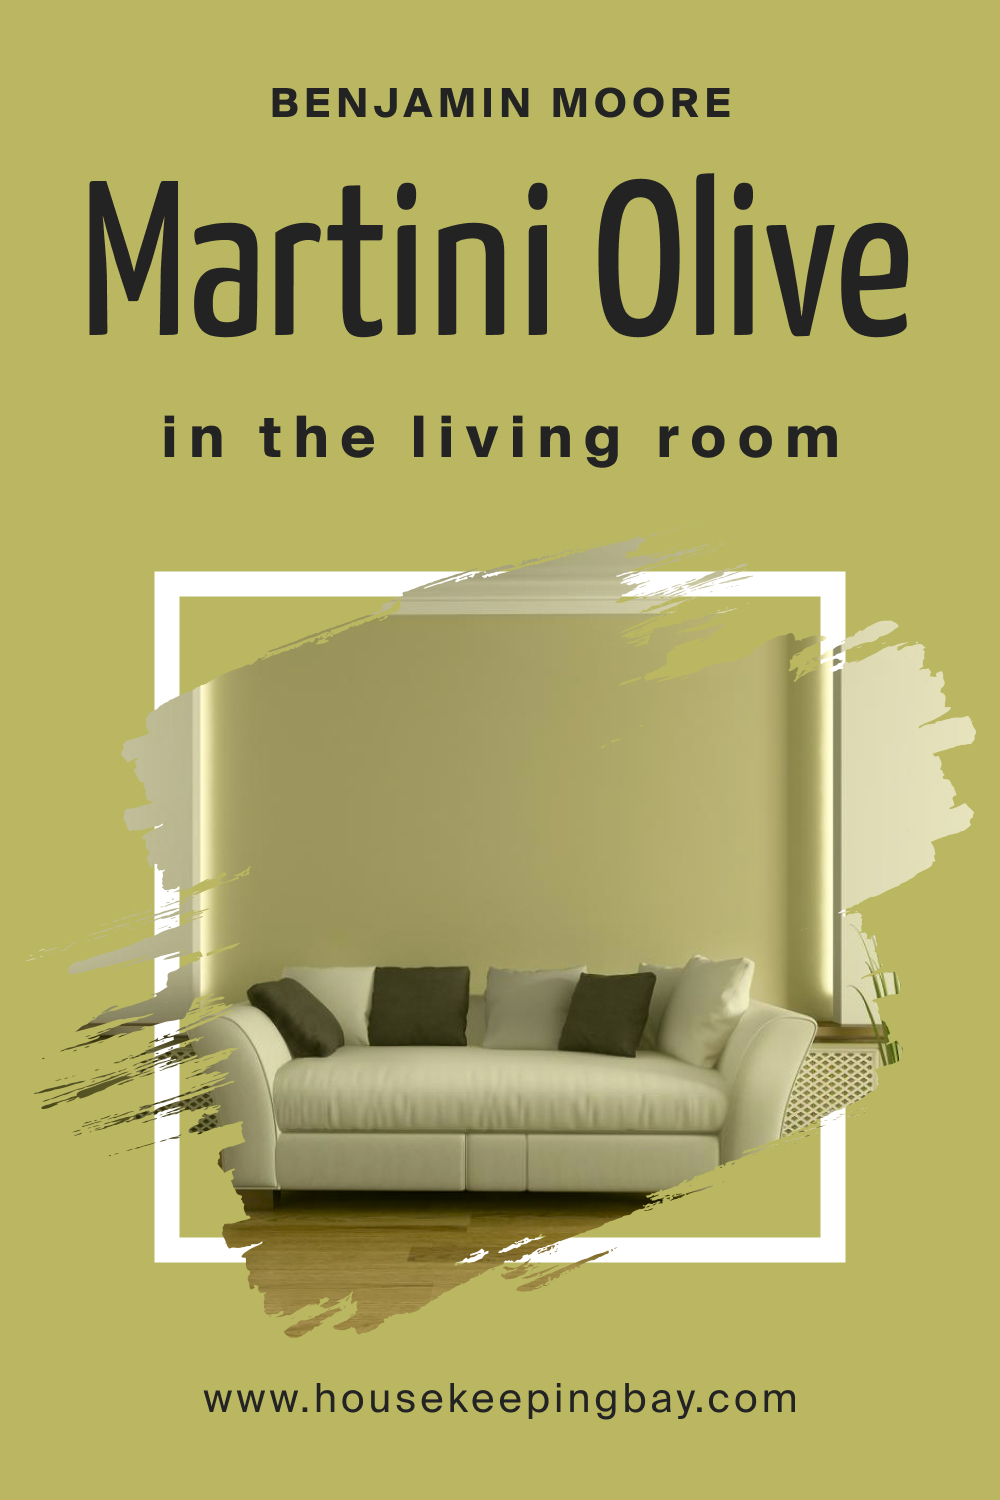 How to Use Martini Olive CSP-890 in the Living Room?